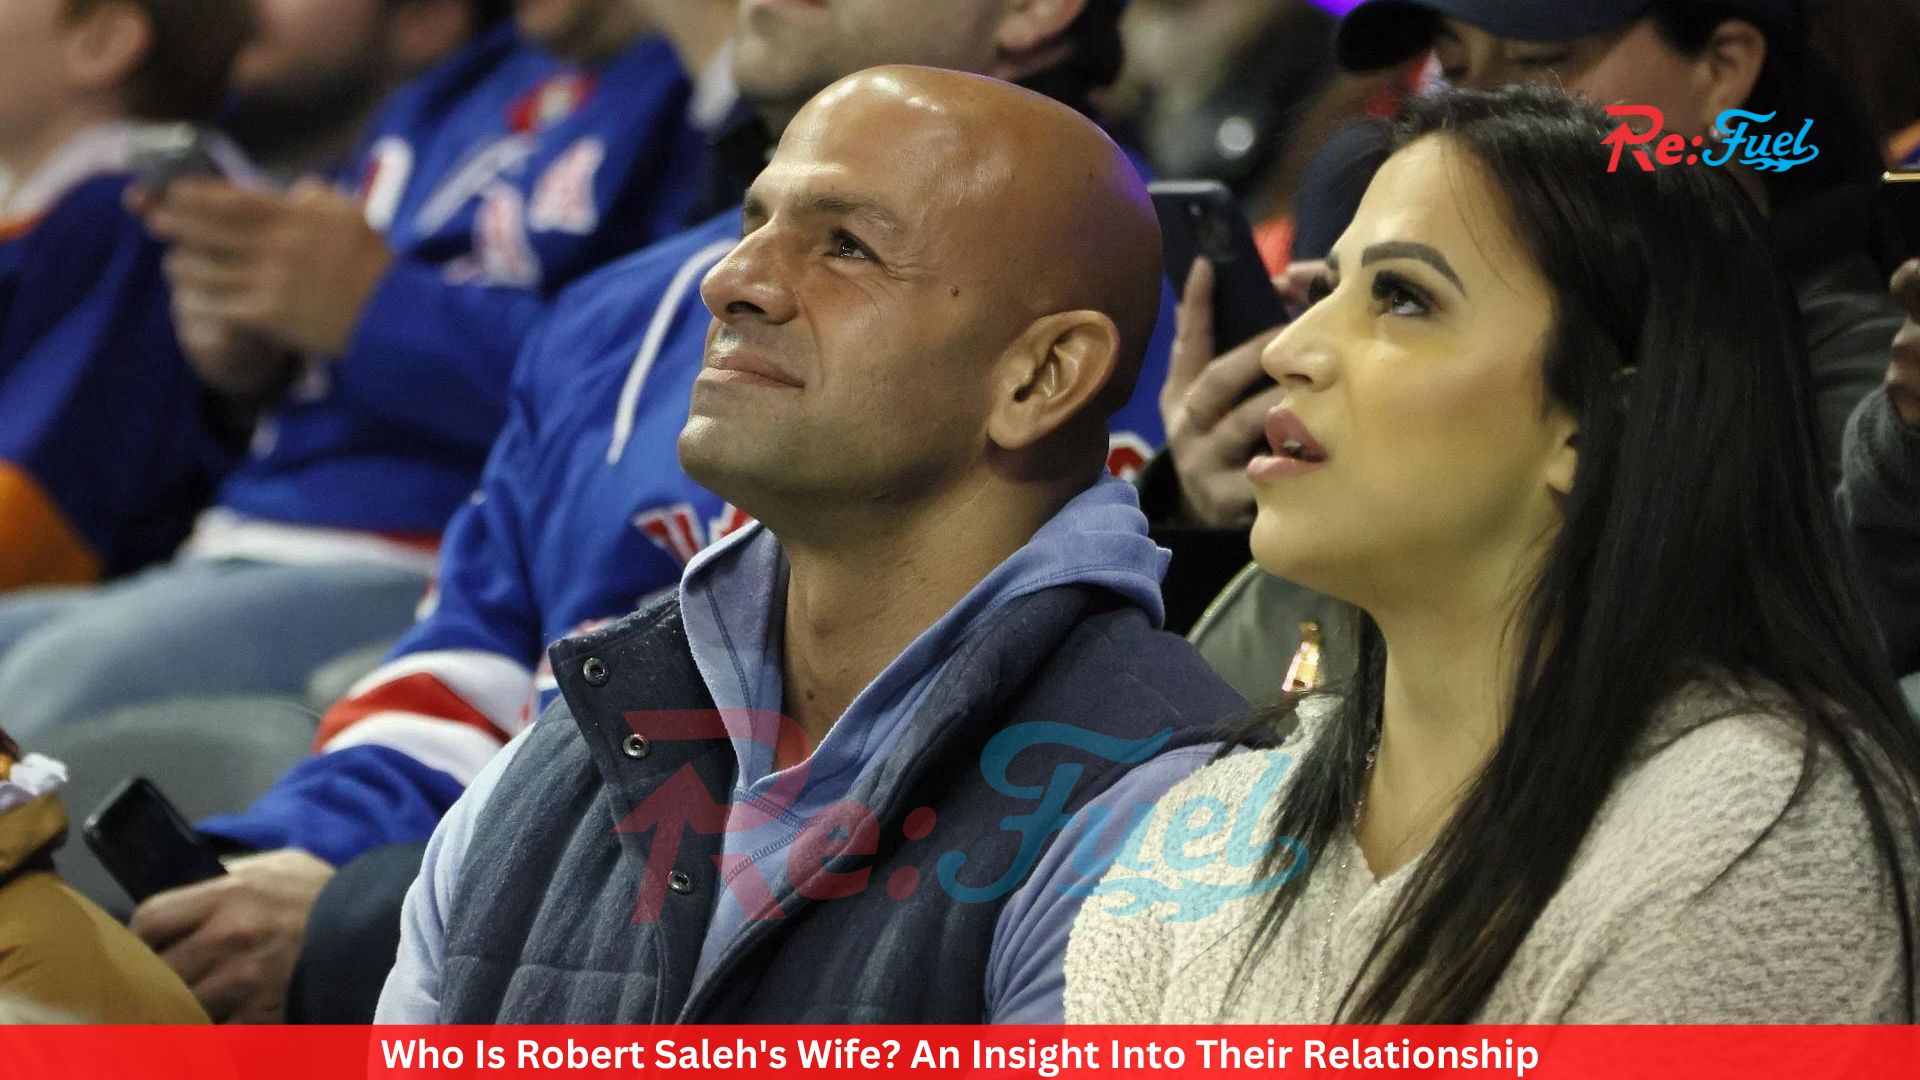 Who Is Robert Saleh's Wife? An Insight Into Their Relationship